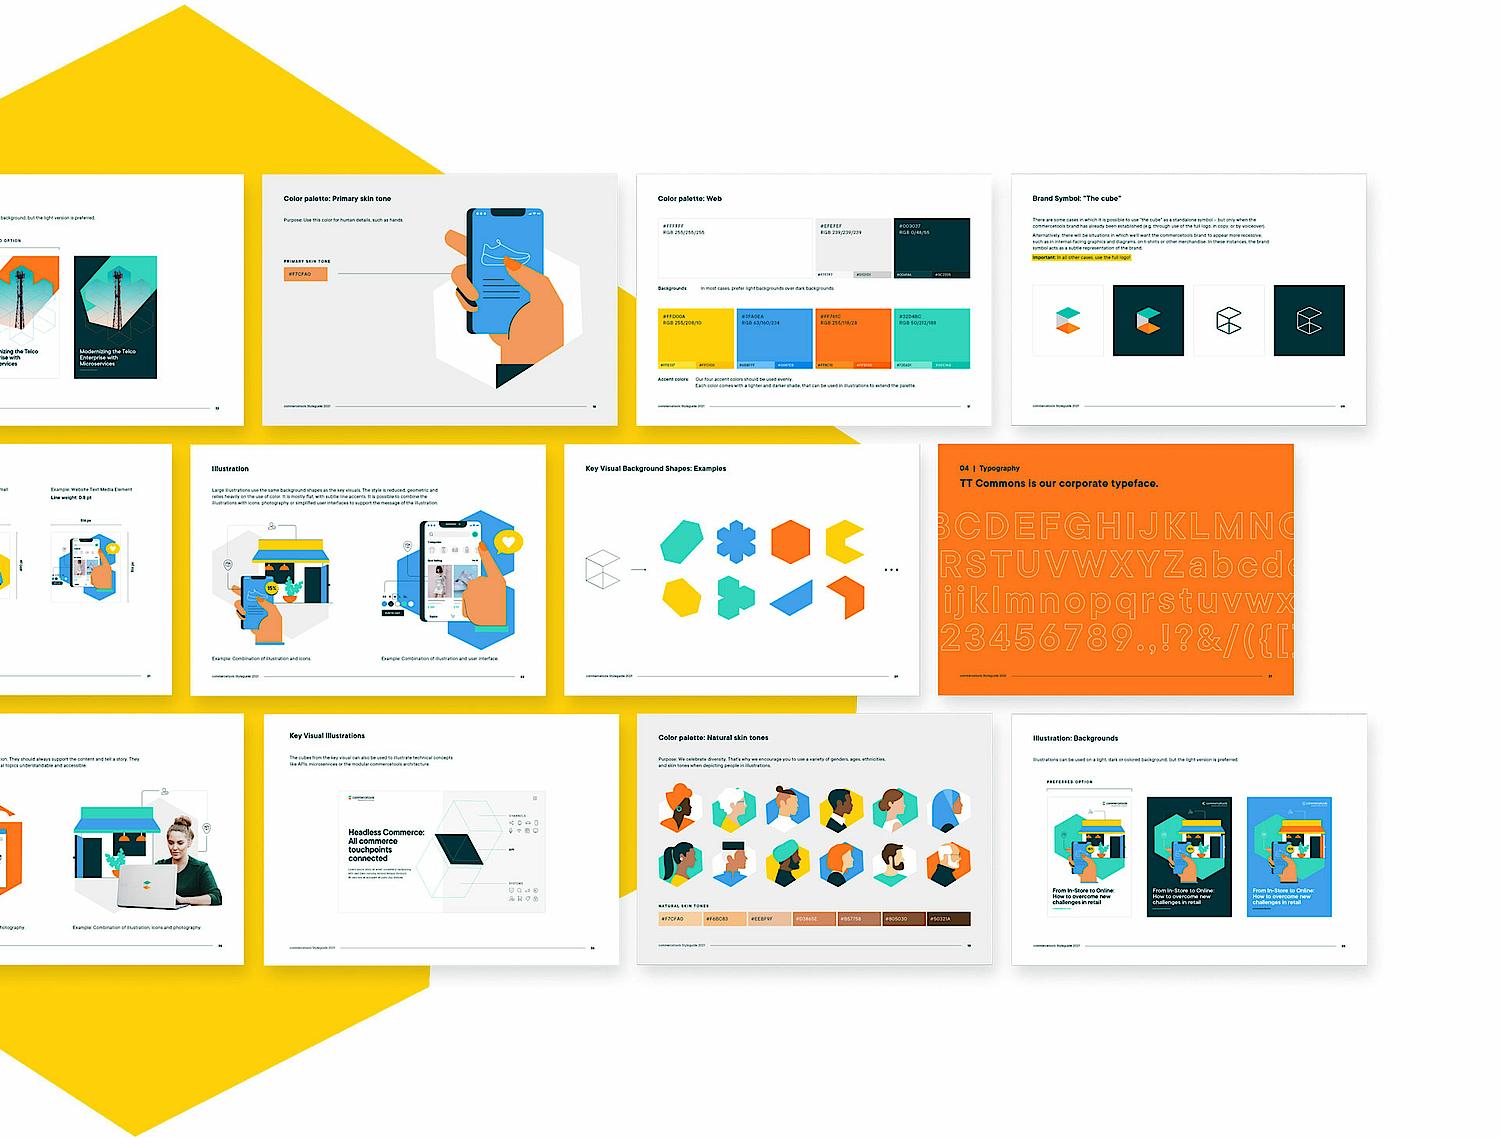 You can see the brand style guide for Commercetools created by the design agency SNK with bright eye-catching colors and diverse motifs